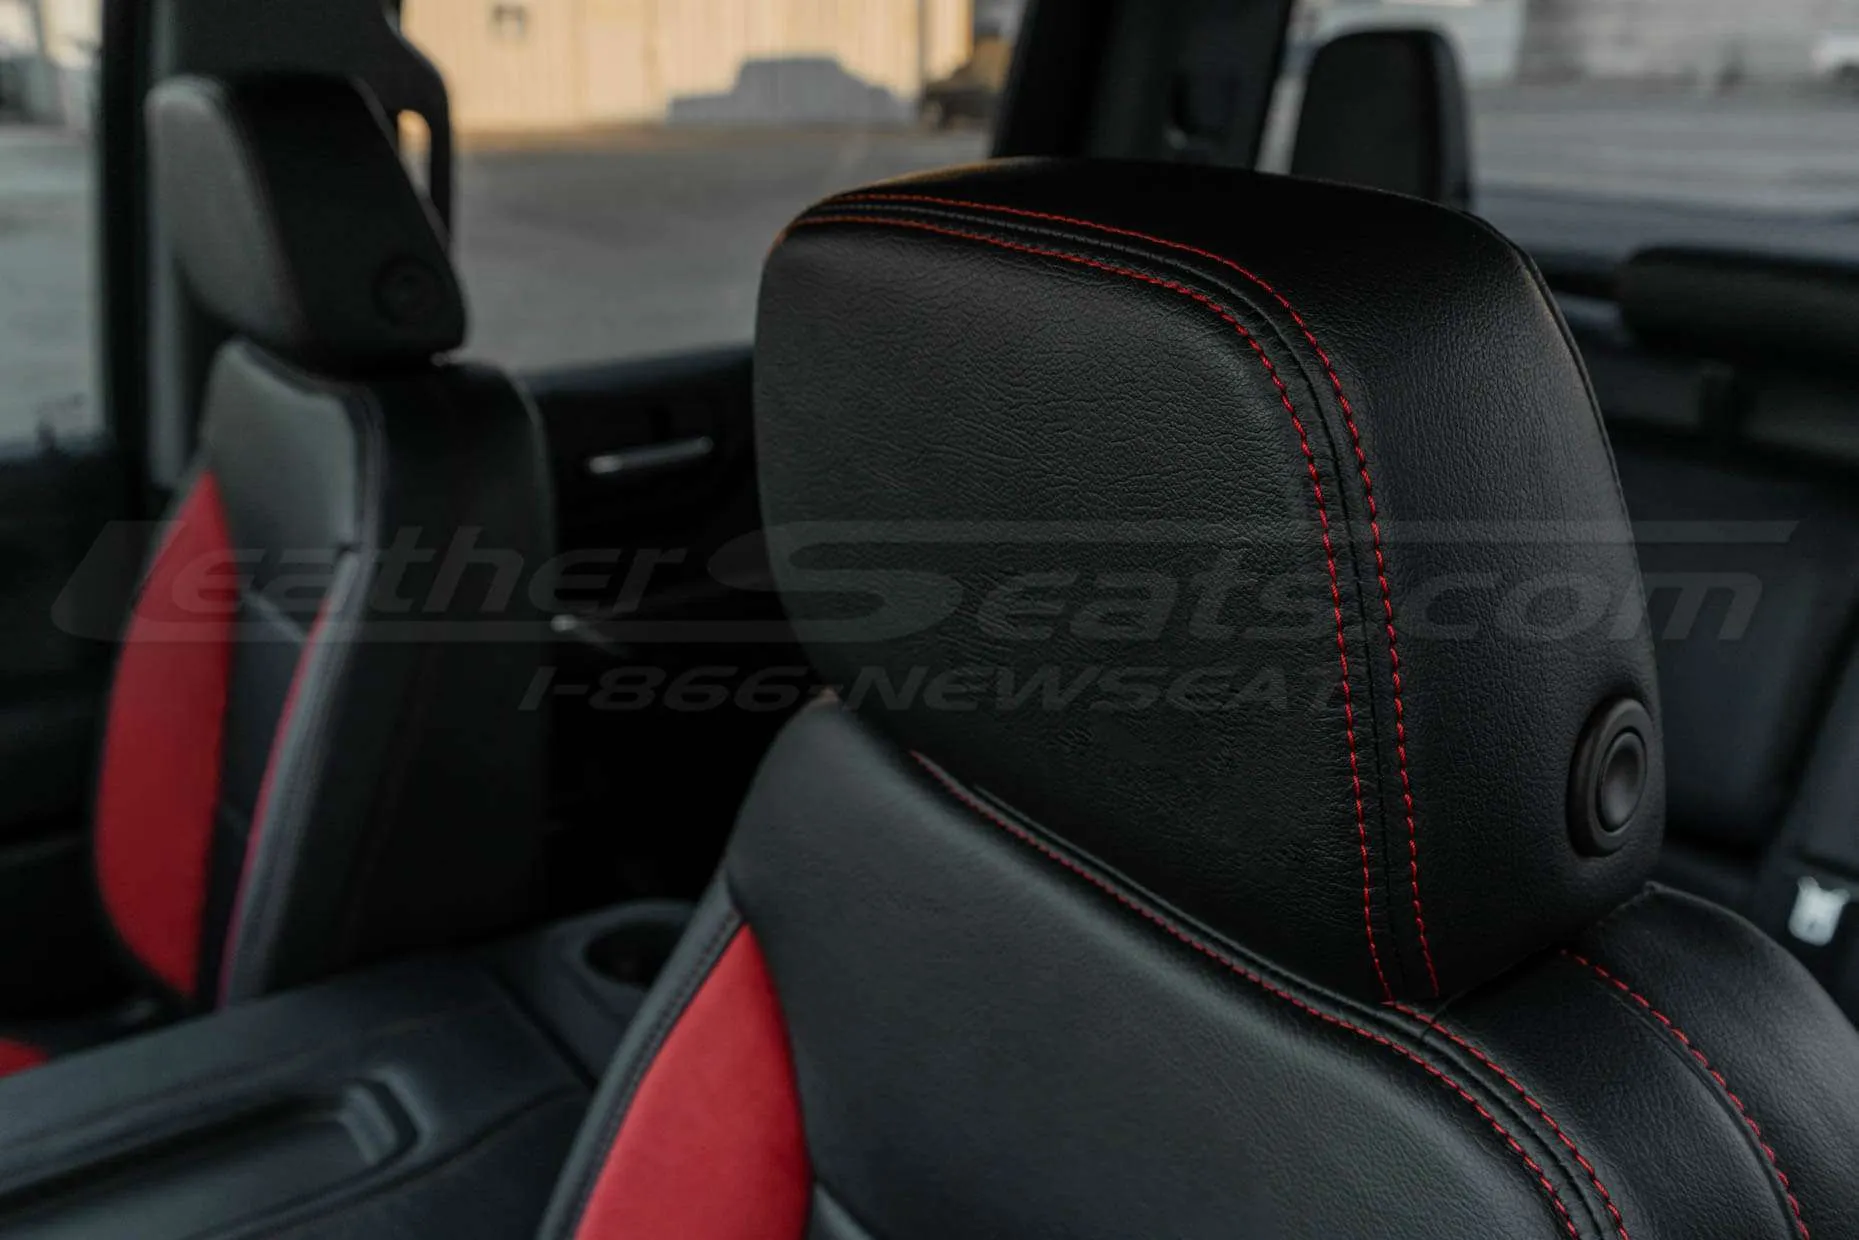 Chevrolet Silverado Leather Seat Kit - Front headrest with Red double-stitching